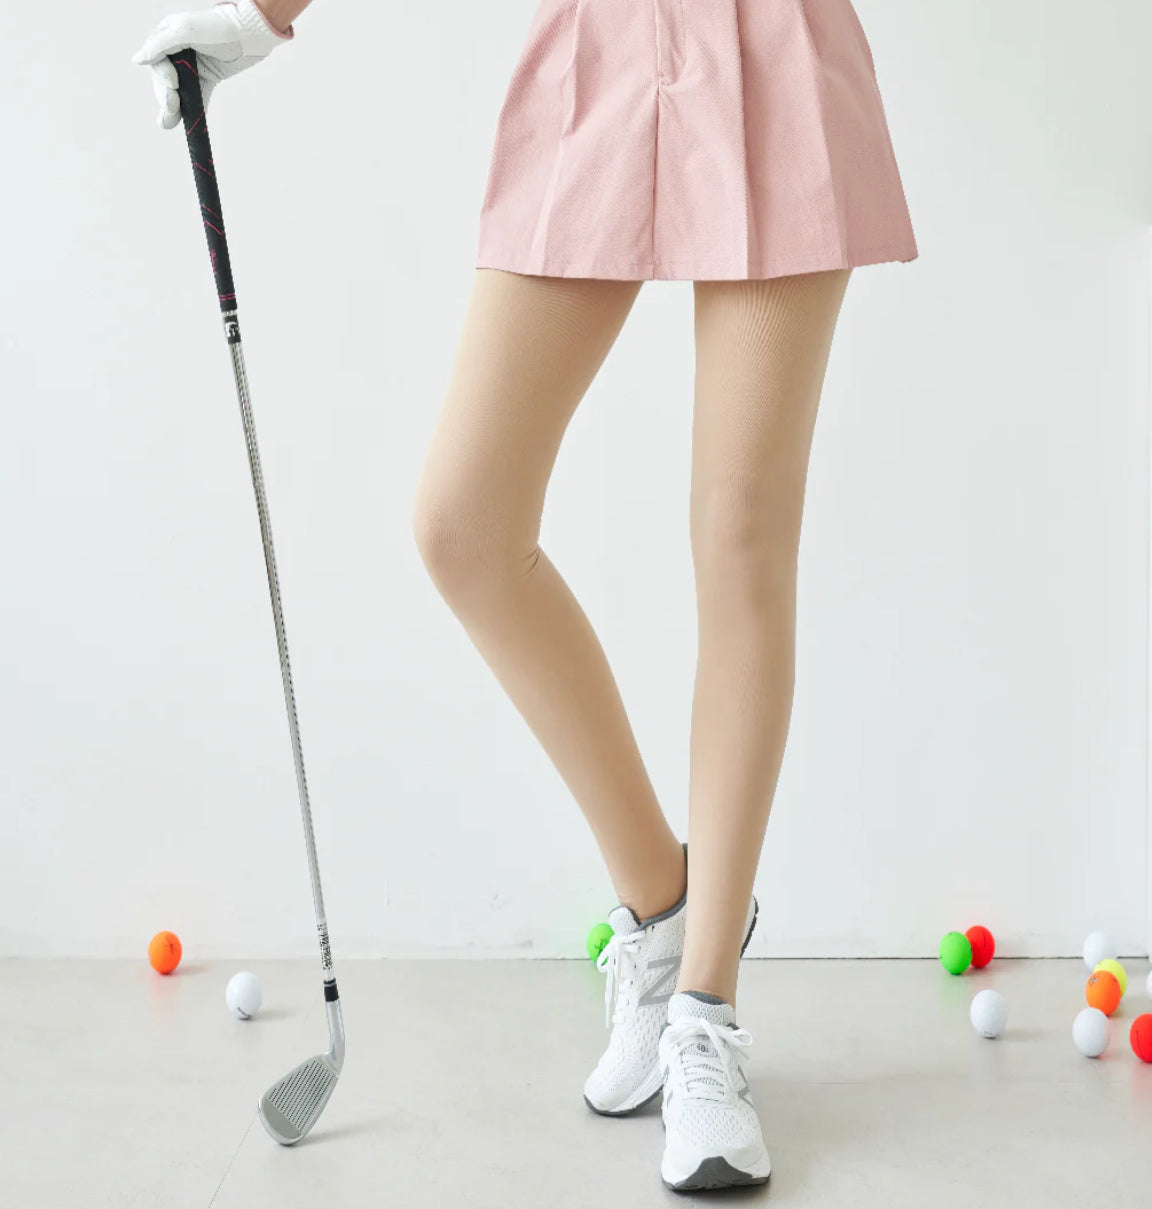 [Bonneterie] 50D Golf Stocking for Spring and Autumn